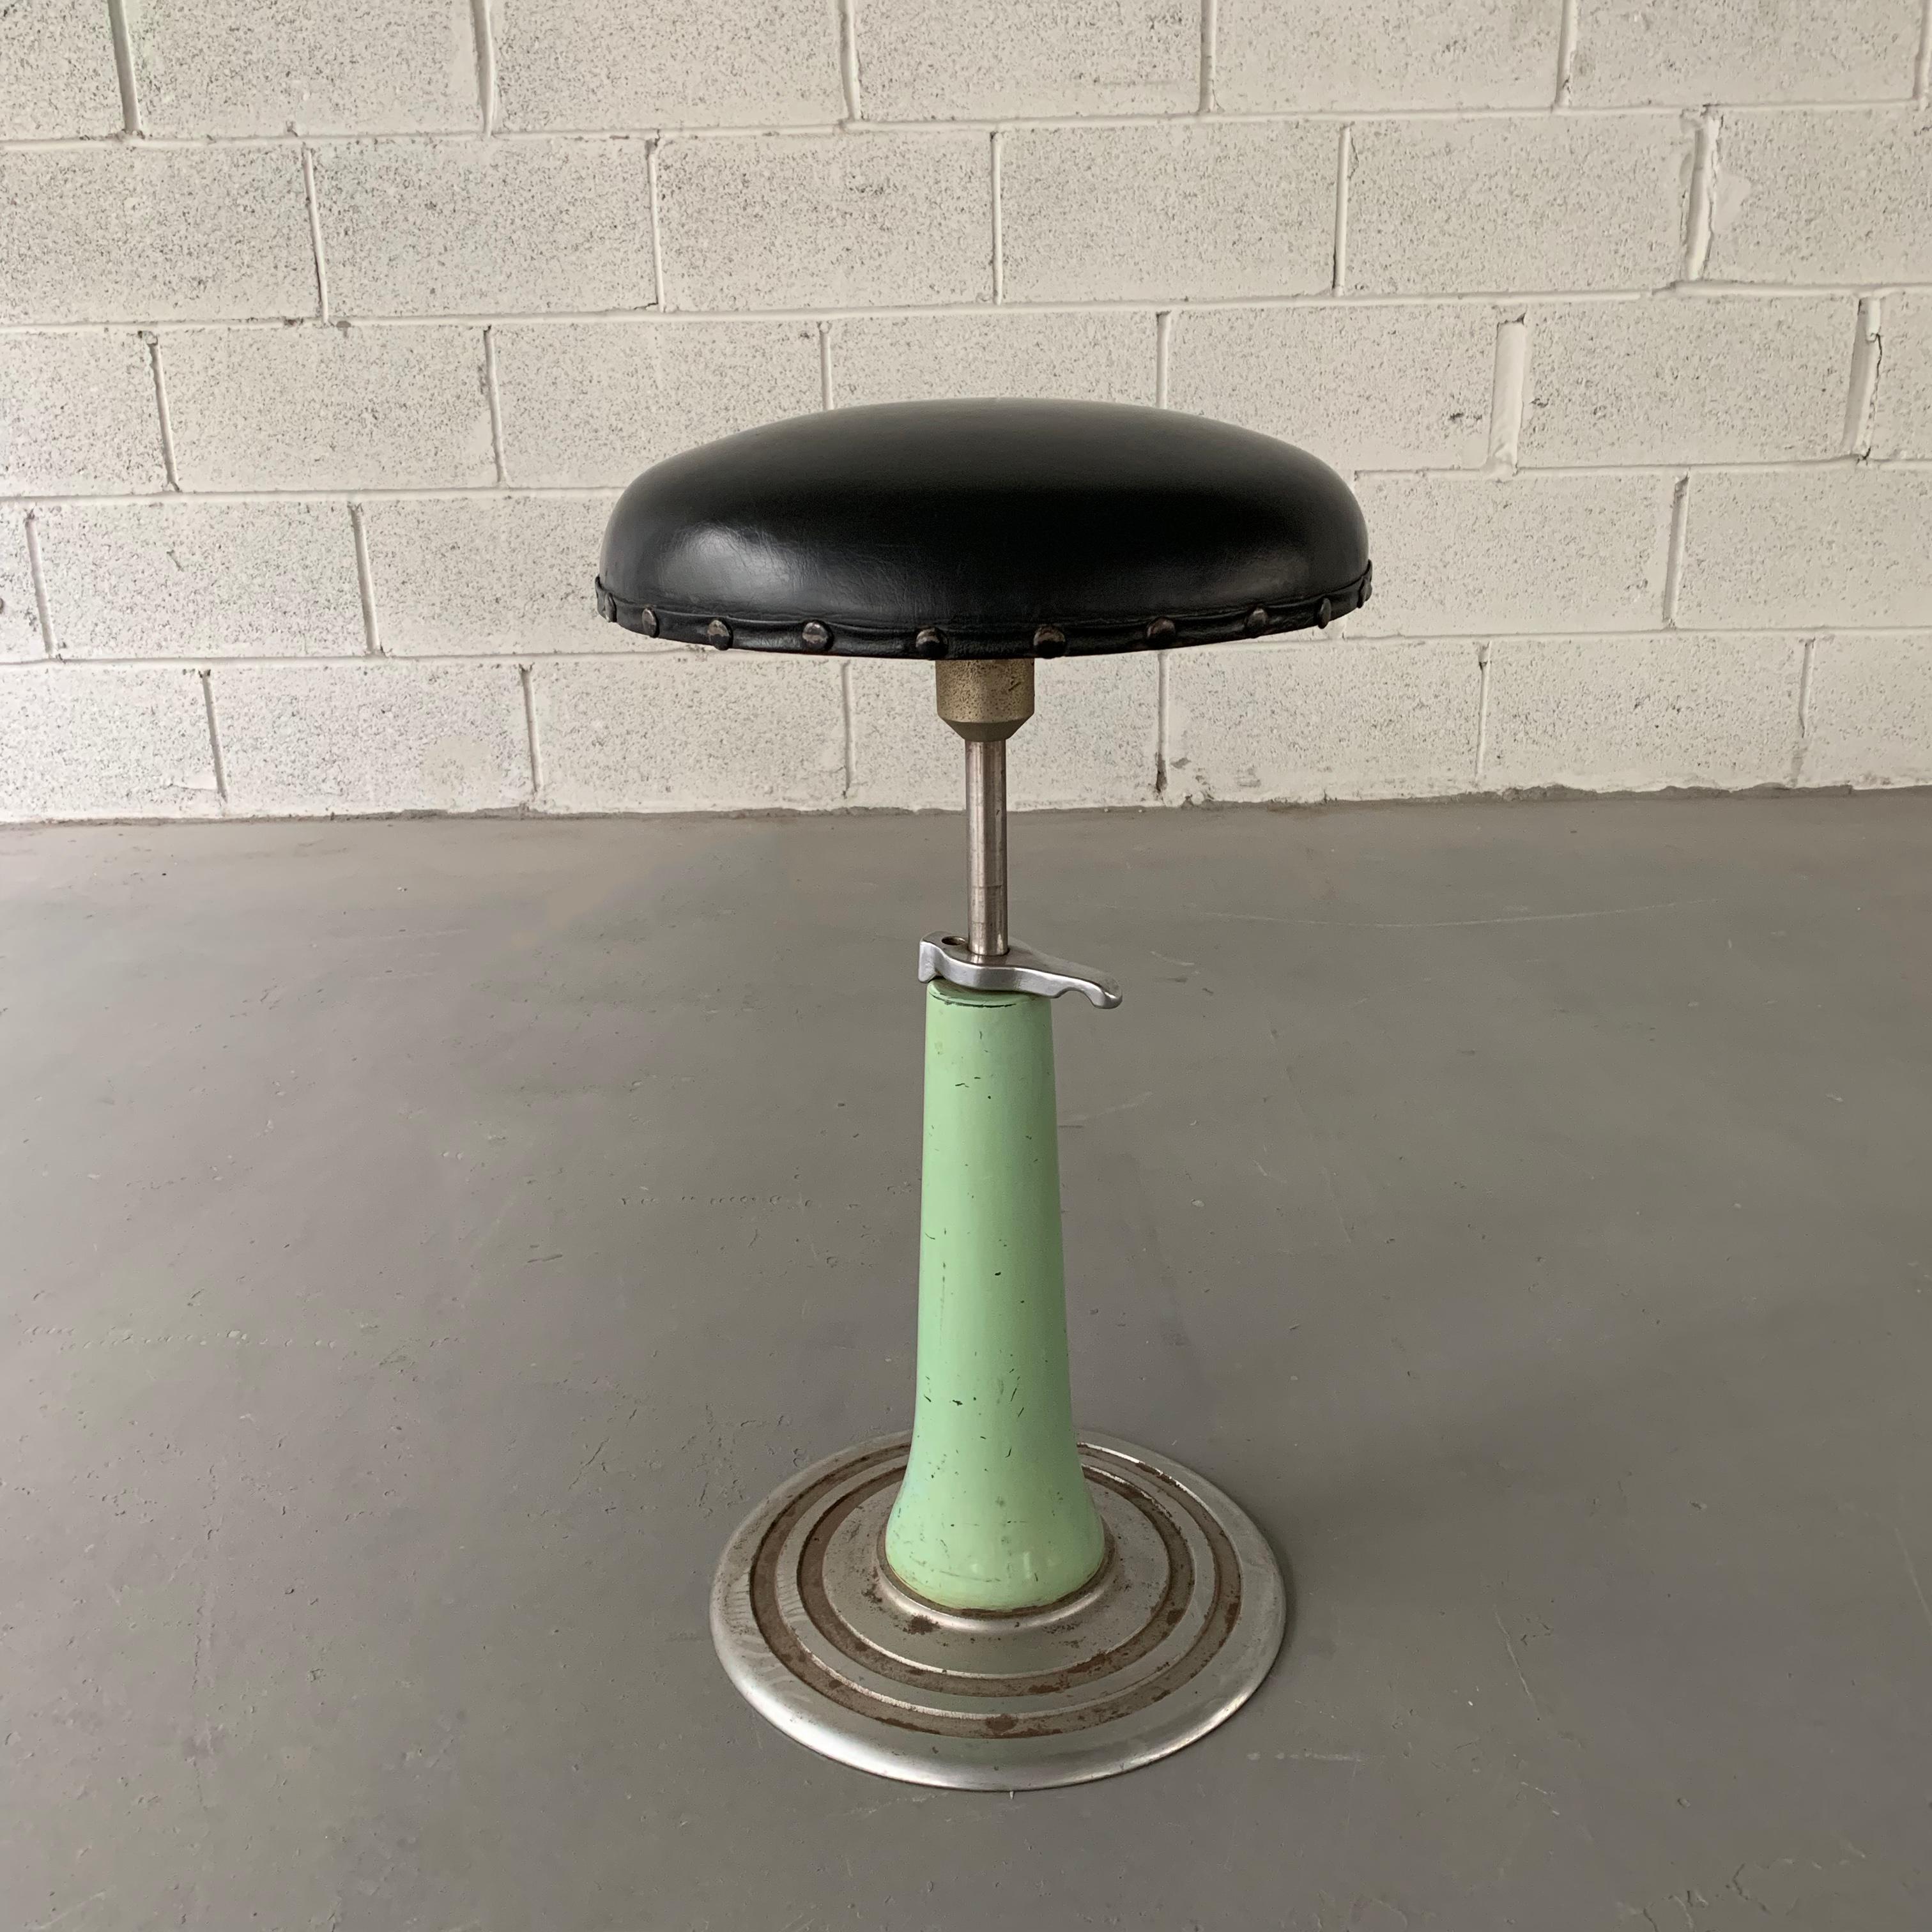 Art deco, apothecary, dentist stool by KEM Weber features a painted steel pedestal base that is adjustable from 20-30 inches height with 13 inch diameter, vinyl upholstered seat with nail head trim.